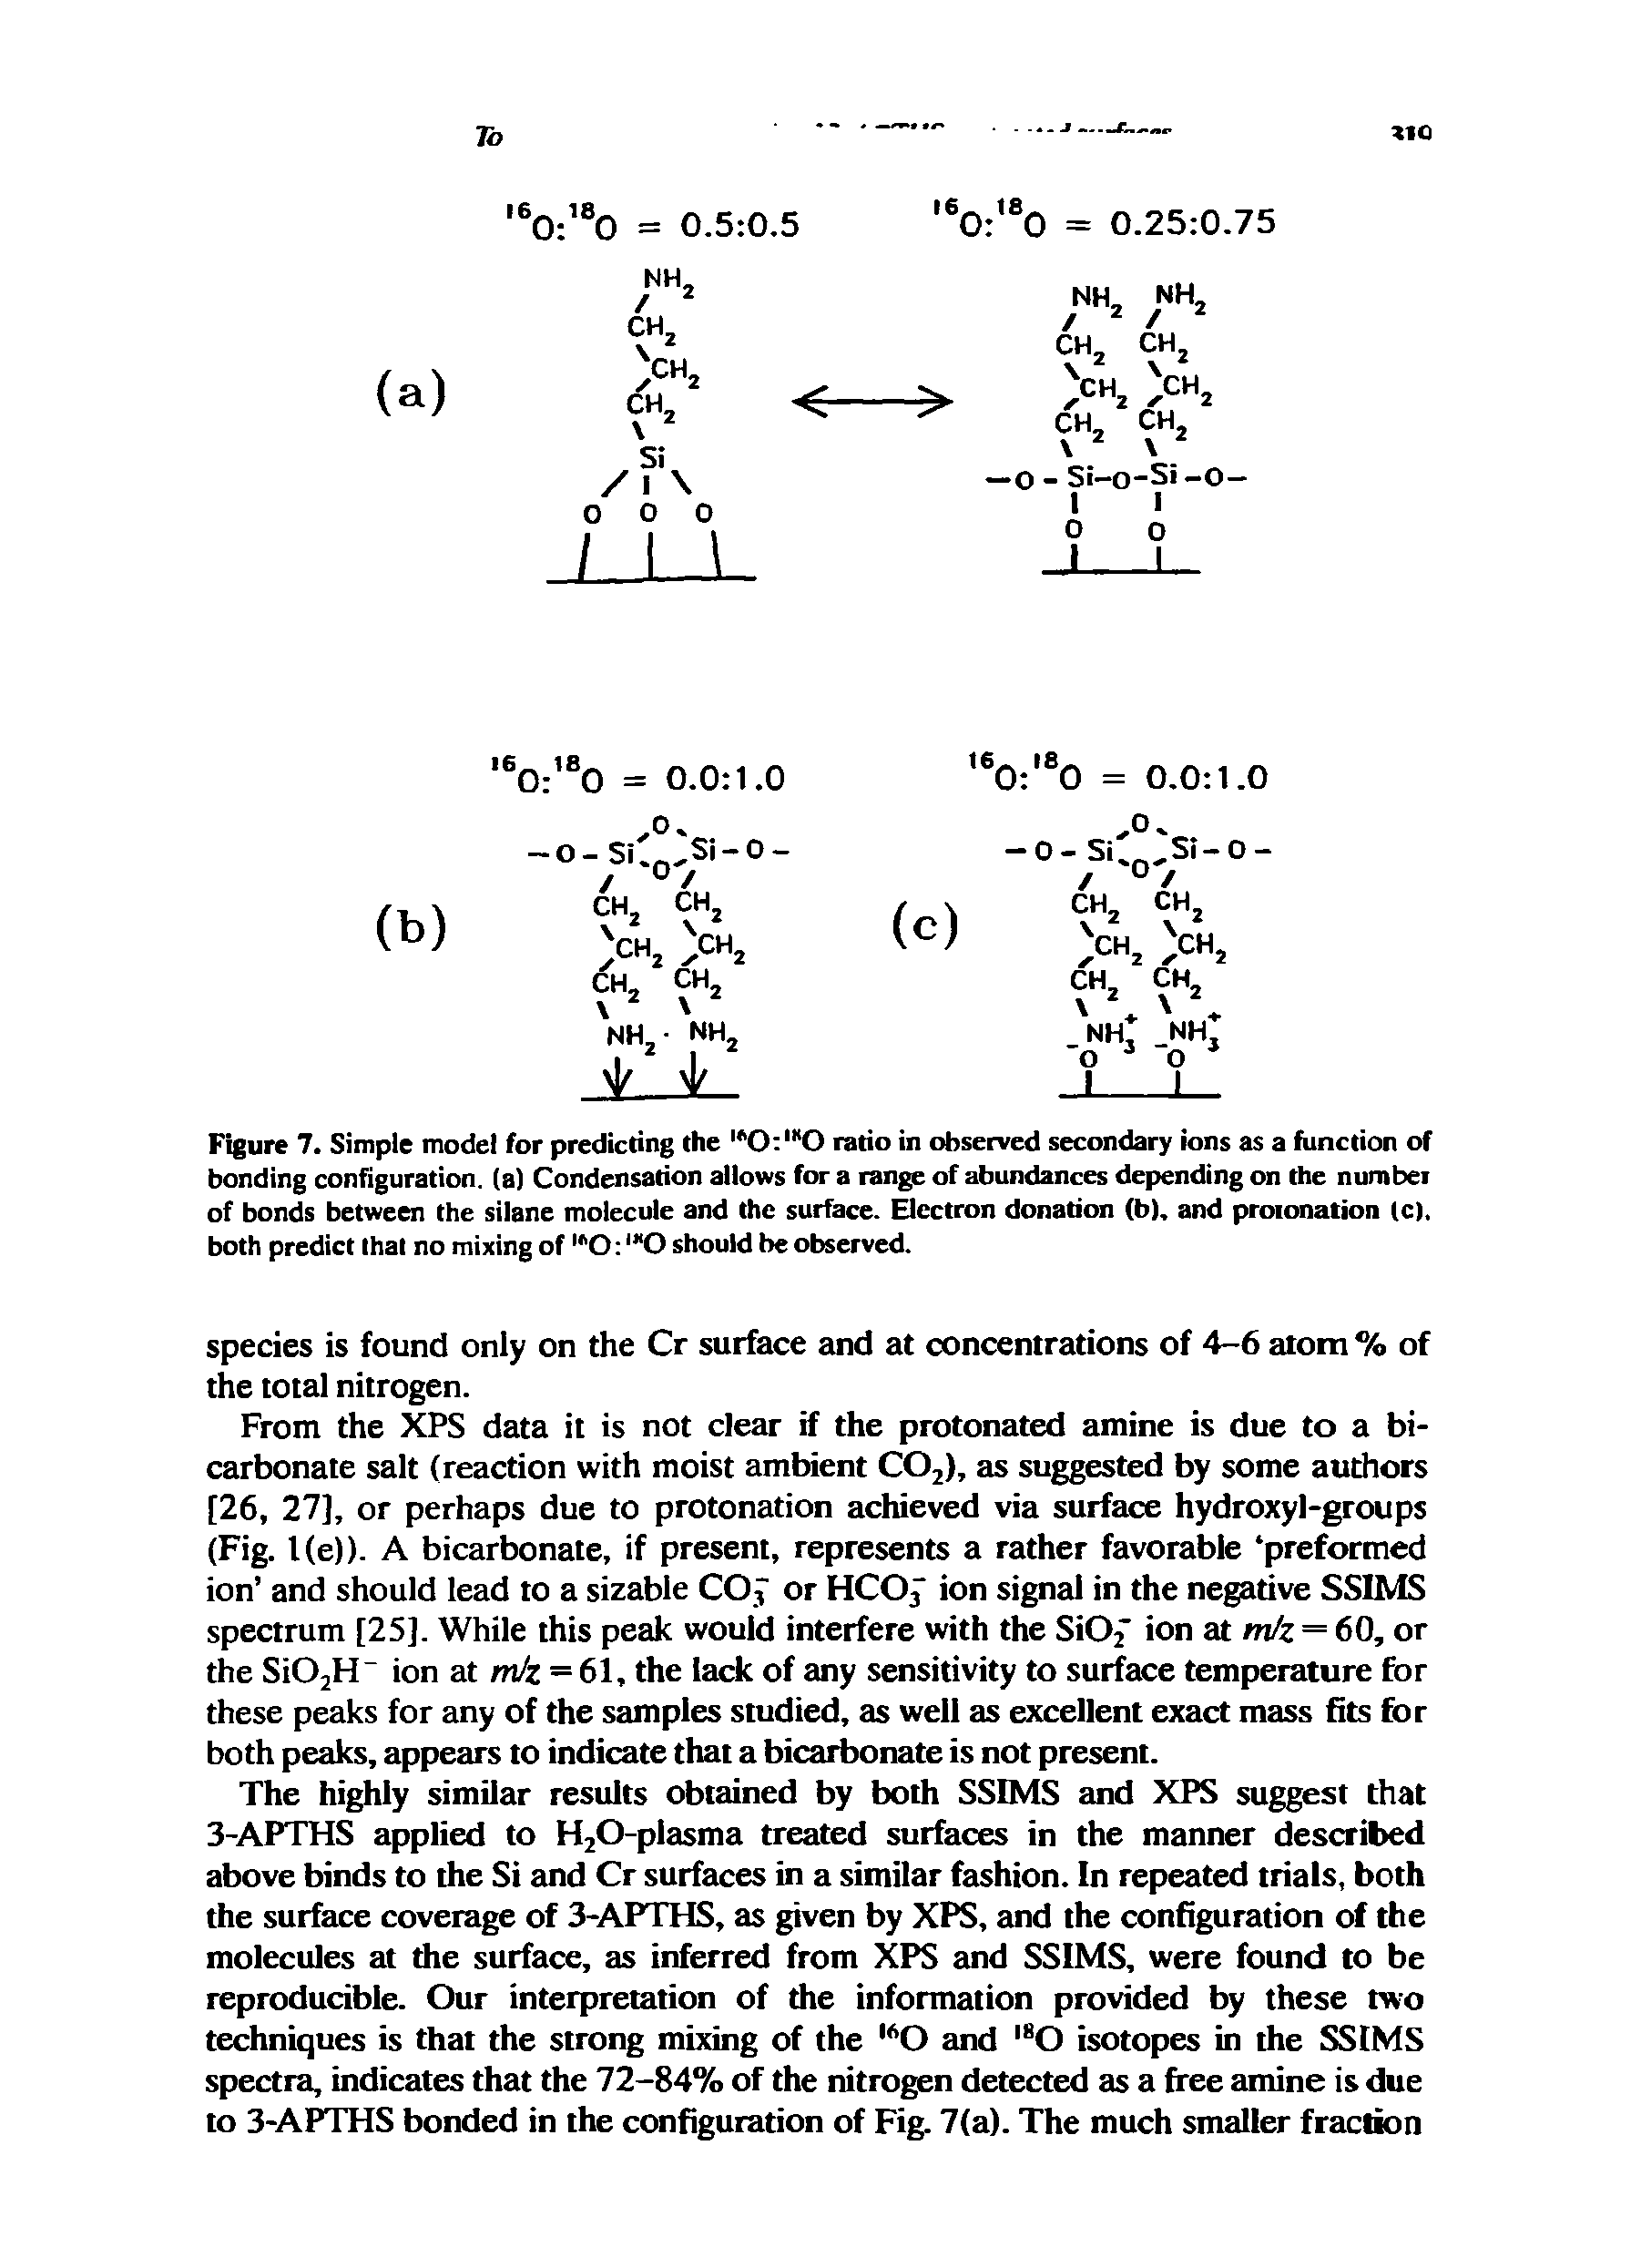 Figure 7. Simple model for predicting the ">0 " 0 ratio in observed secondary ions as a function of bonding configuration, (a) Condensation allows for a range of abundances depending on the number of bonds between the silane molecule and the surface. Electron donation (b). and protonation (c). both predict that no mixing of O O should be observed.